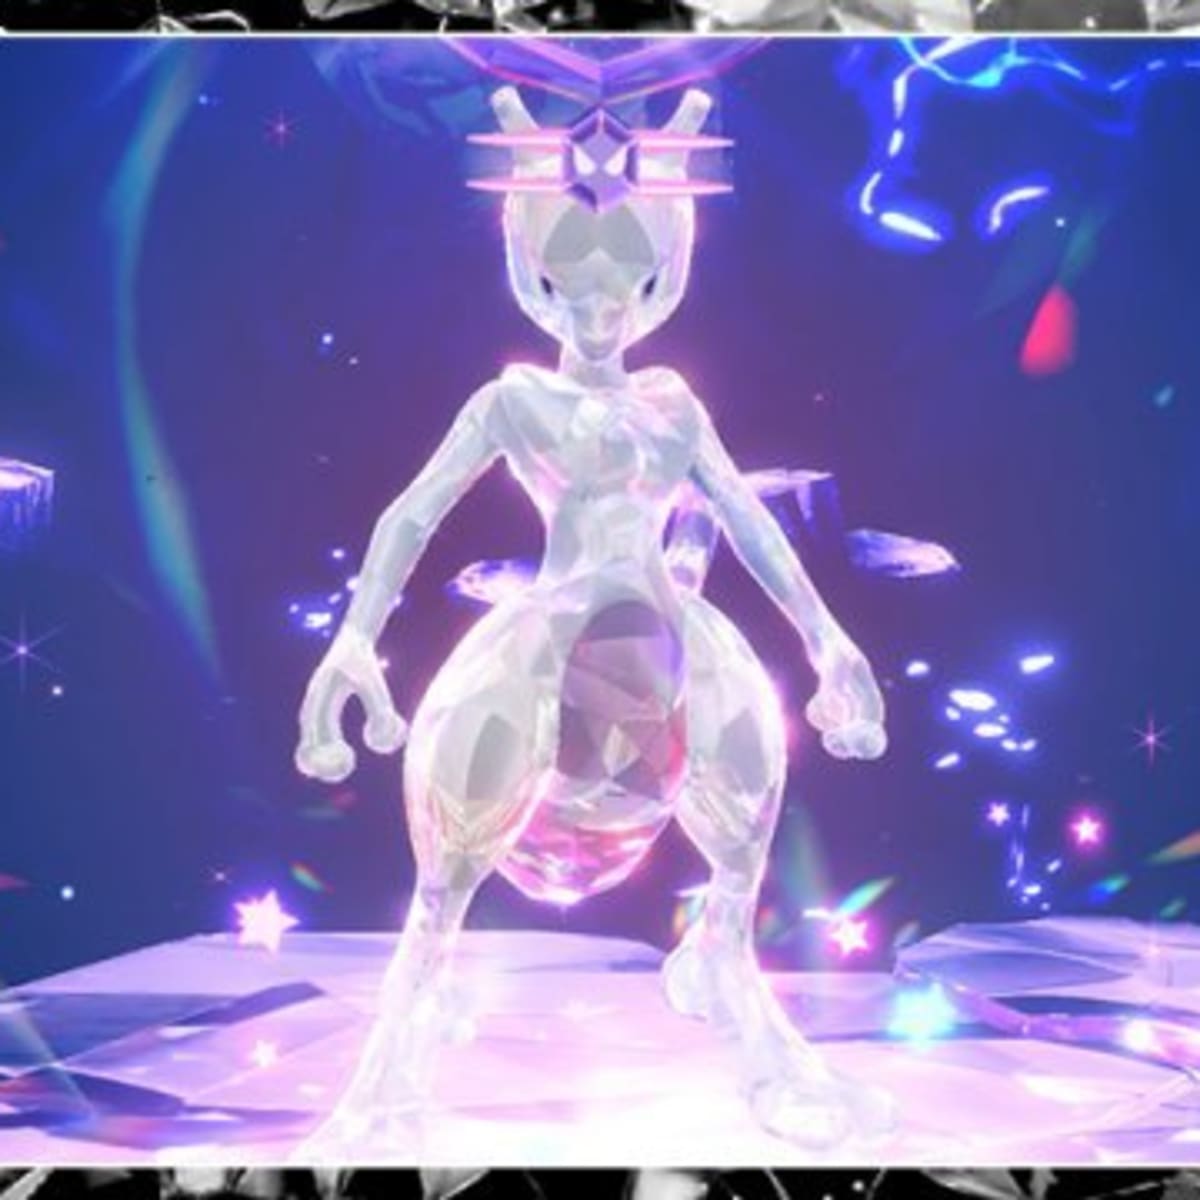 Pokemon Go Armored Mewtwo guide: weakness, counters, best moveset and shiny  detailed